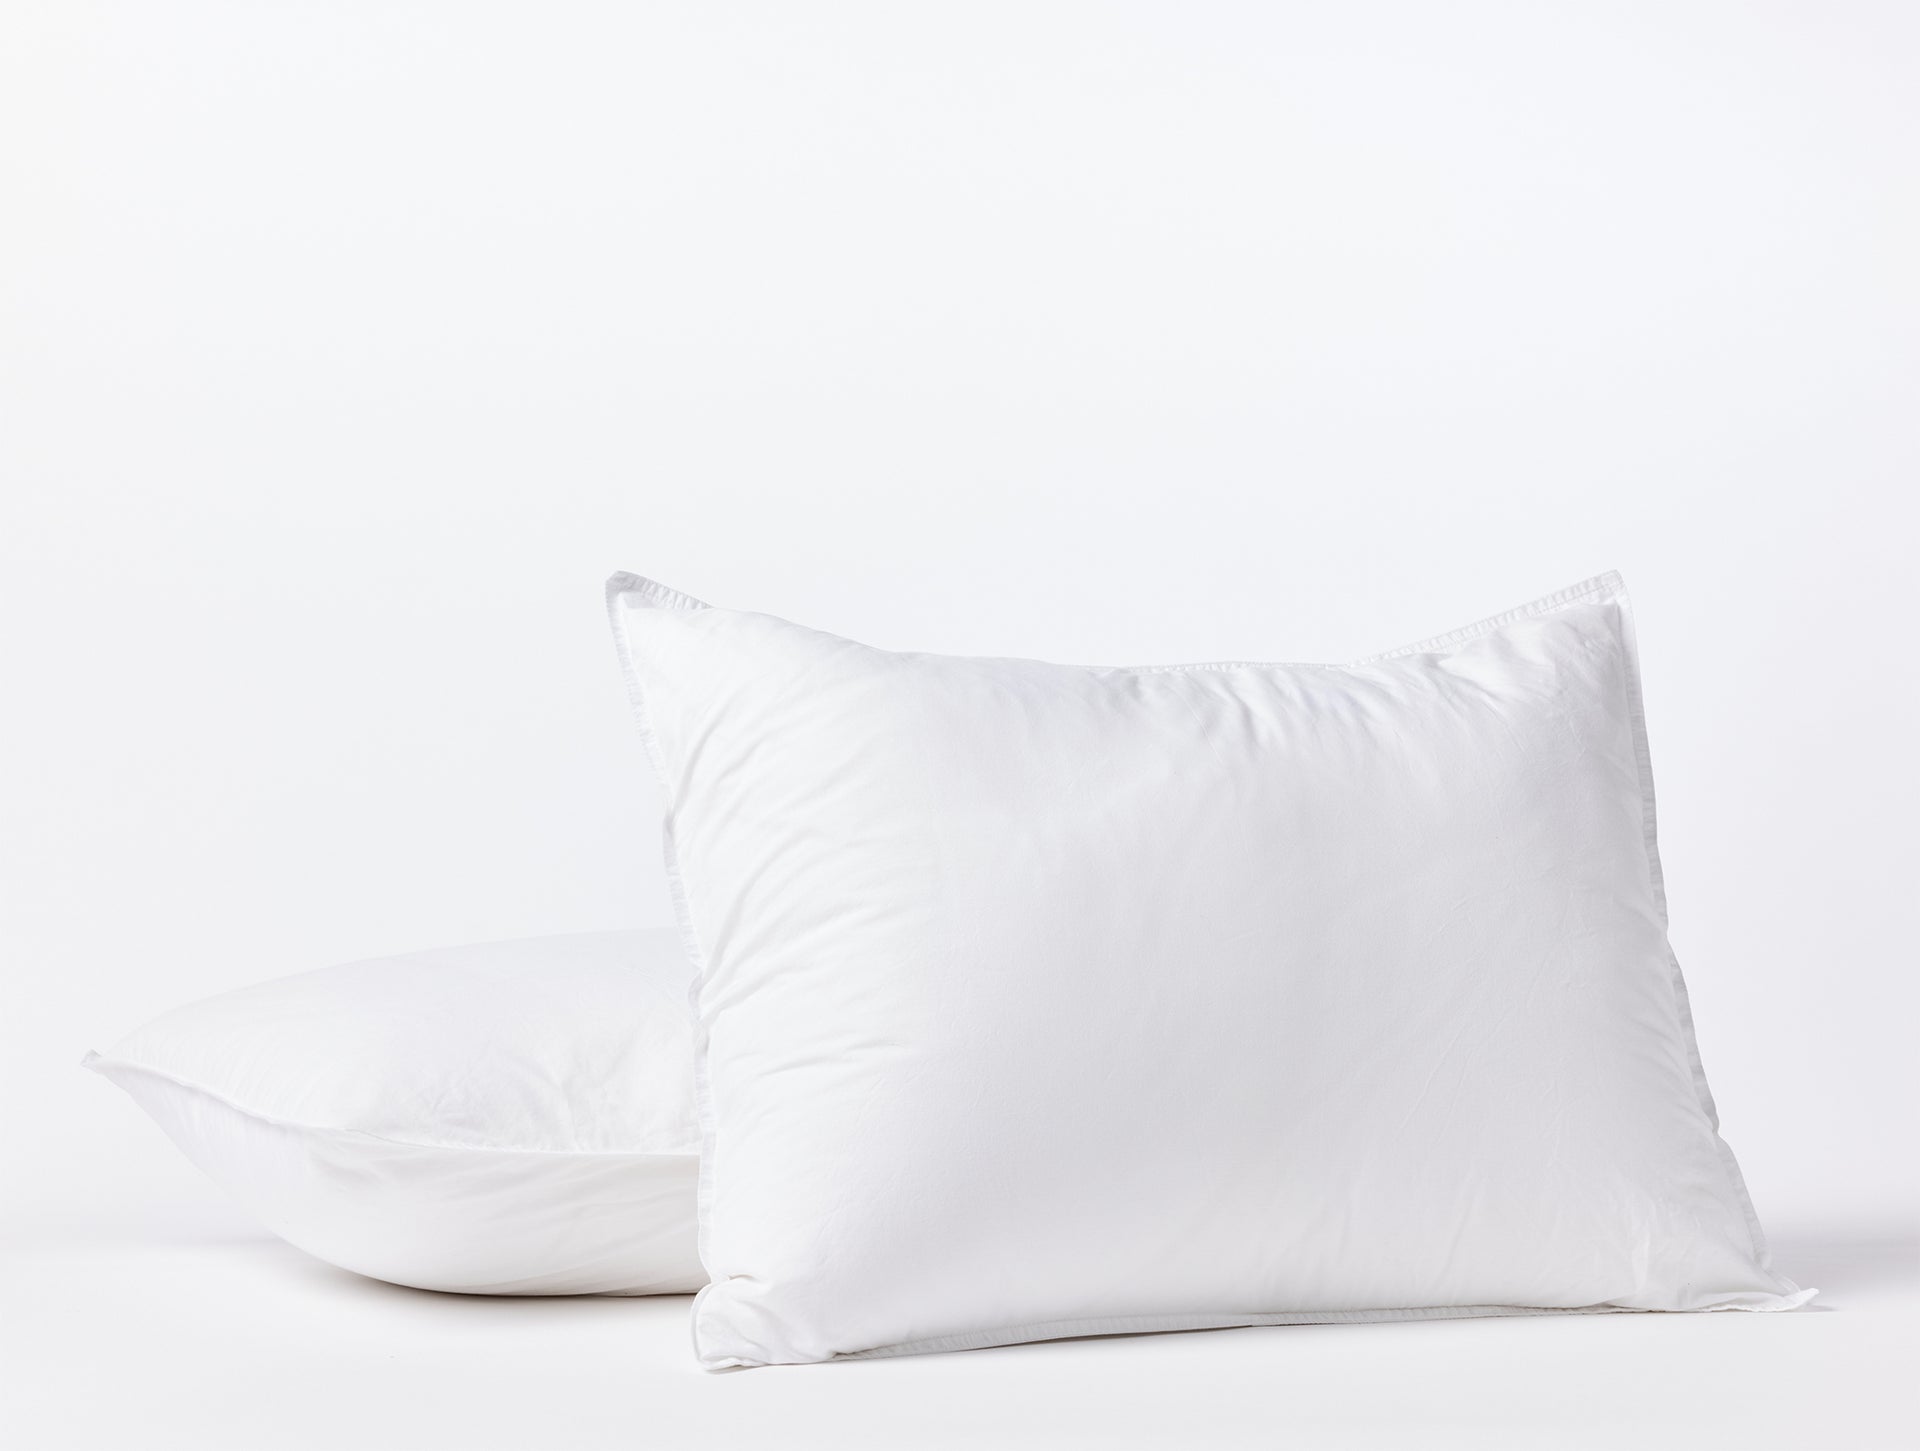 Organic Crinkled Percale™ Bedding Set in Queen 